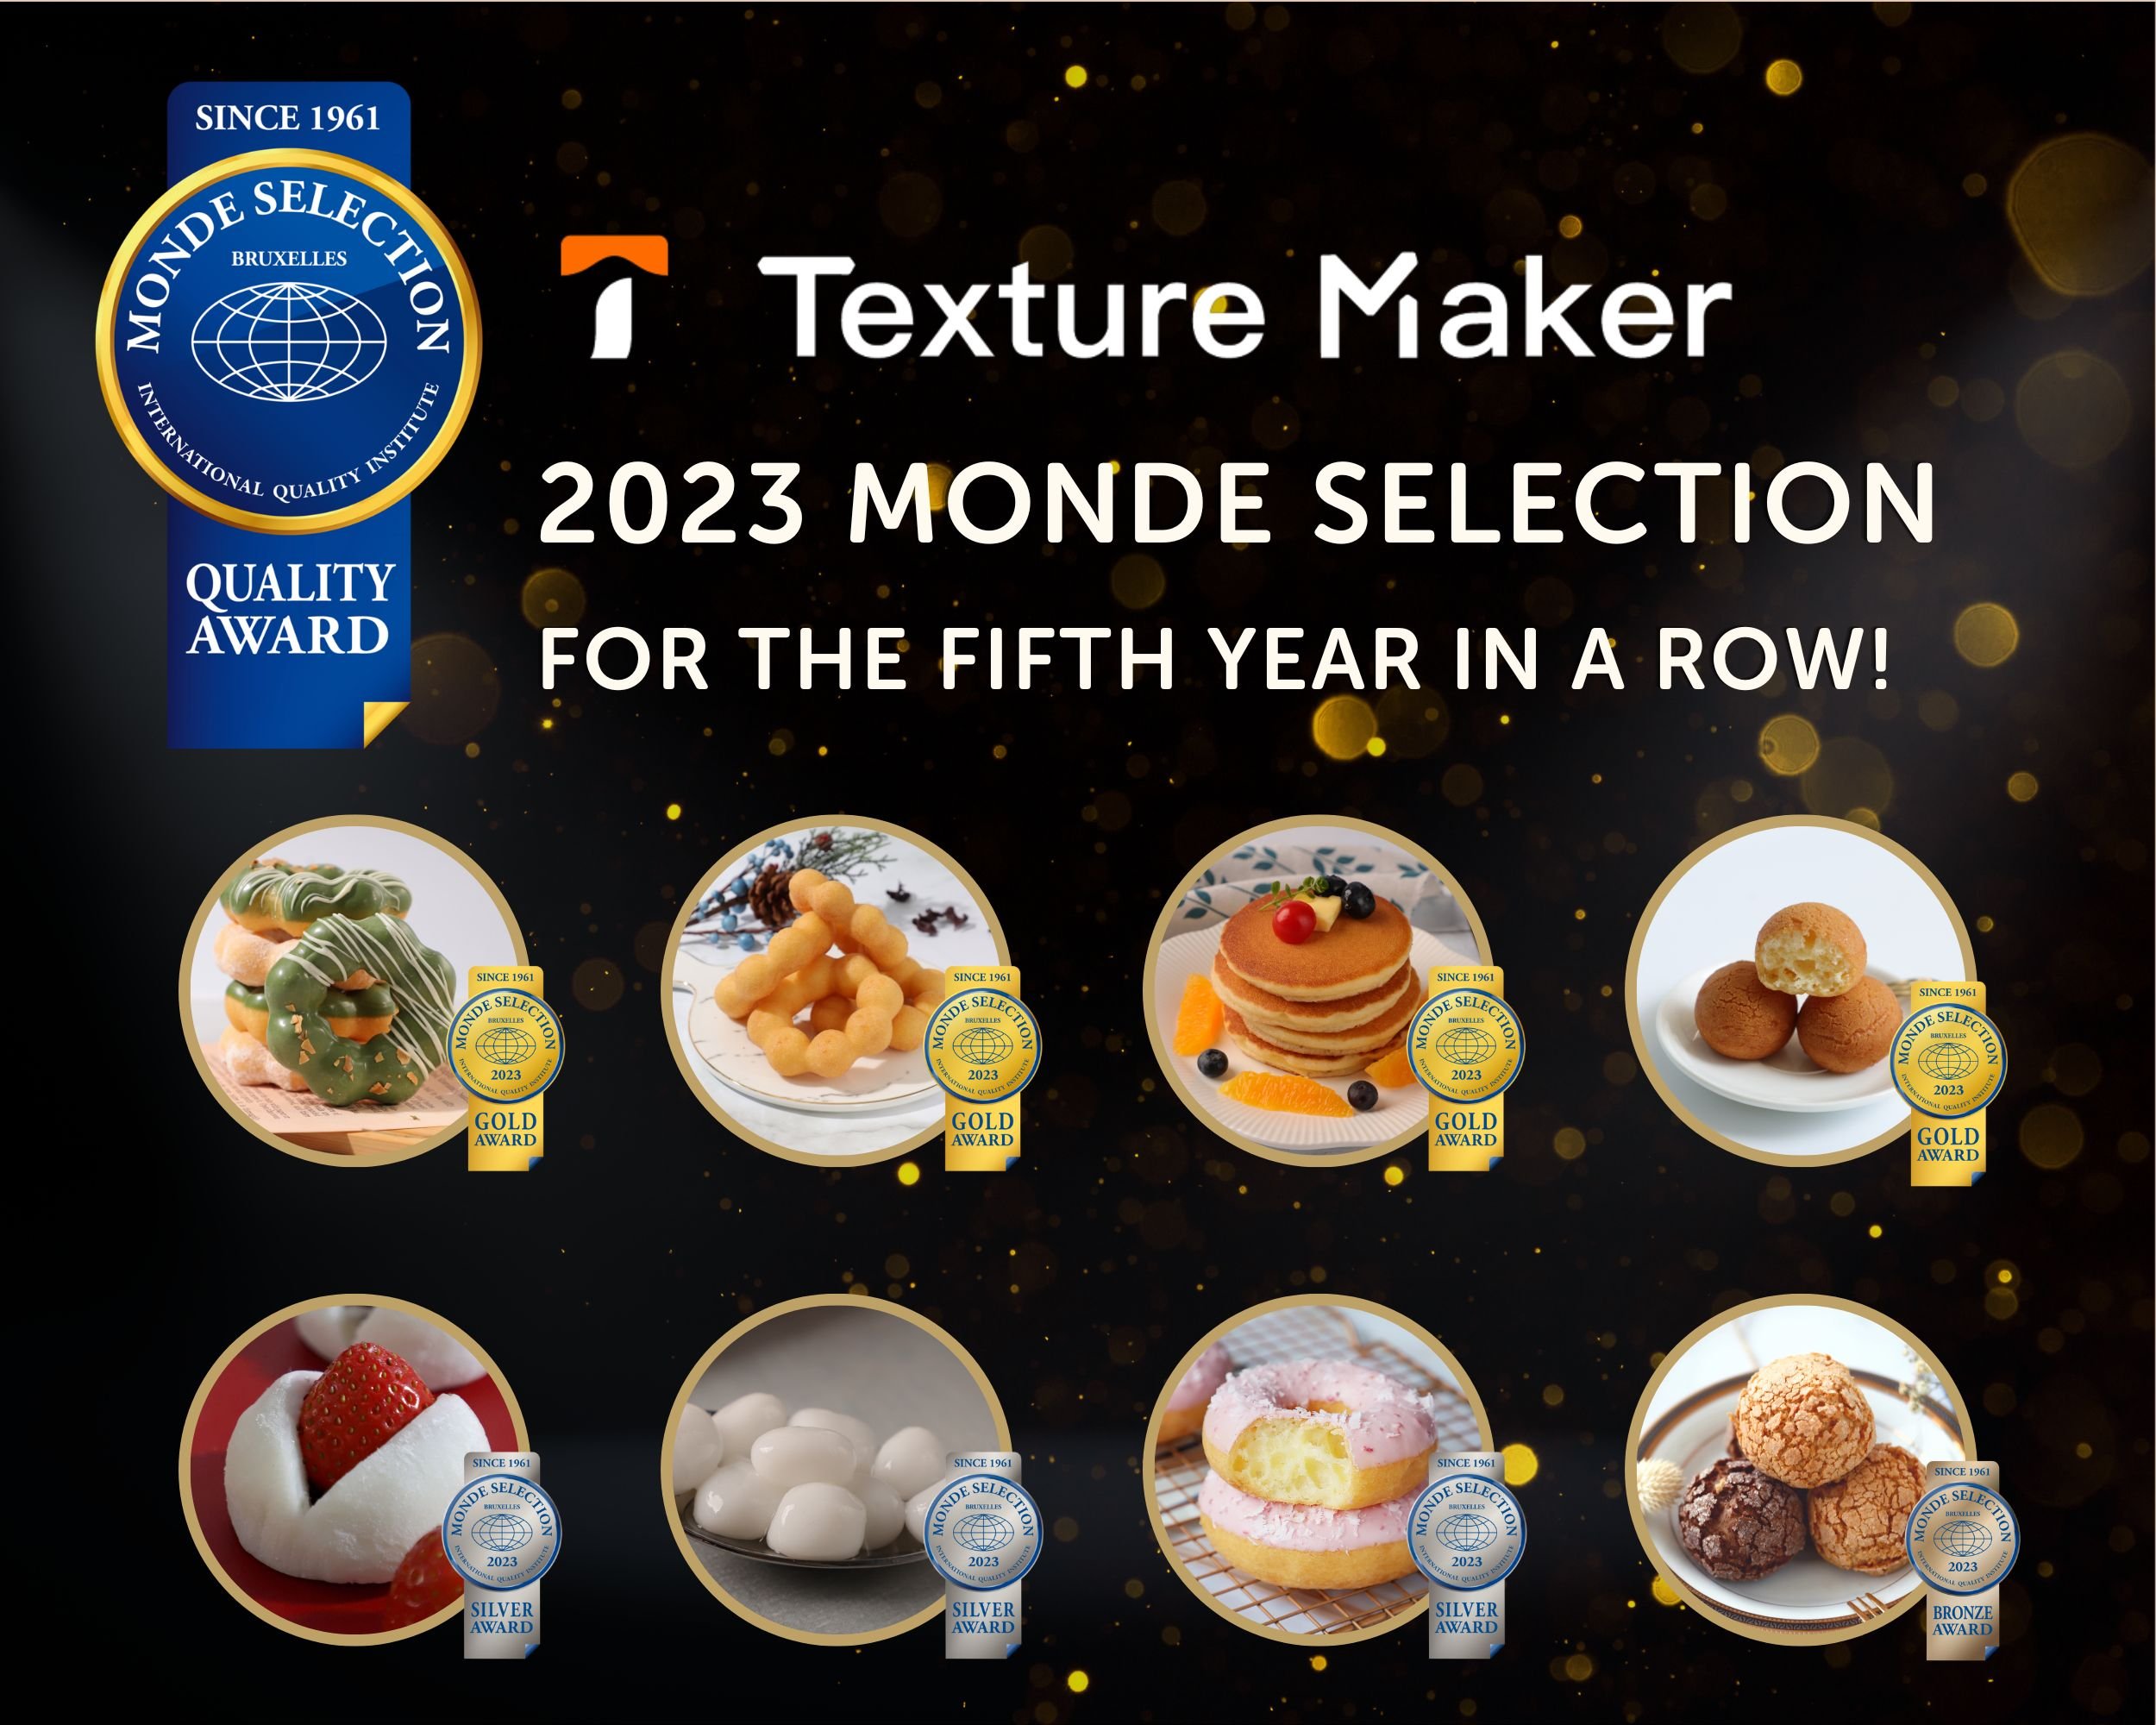 Fondant Fromage - Gold Quality Award 2023 from Monde Selection